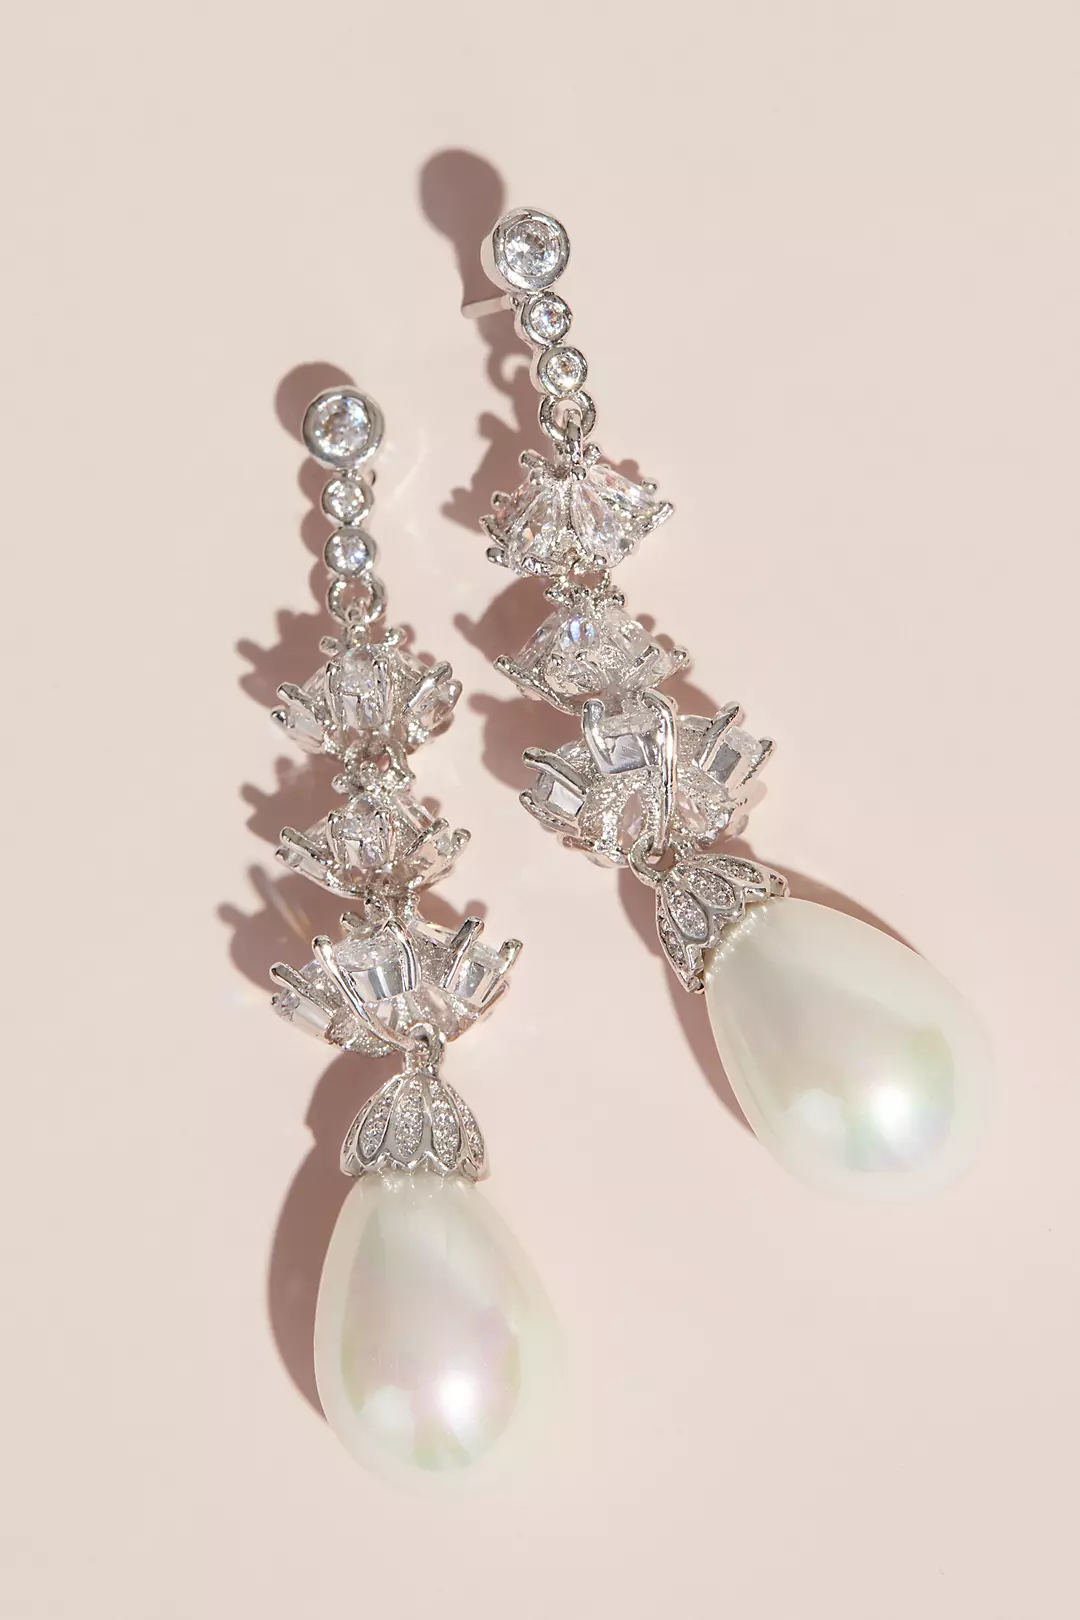 Pearl Drop Earrings with Cubic Zirconia Crystals Image